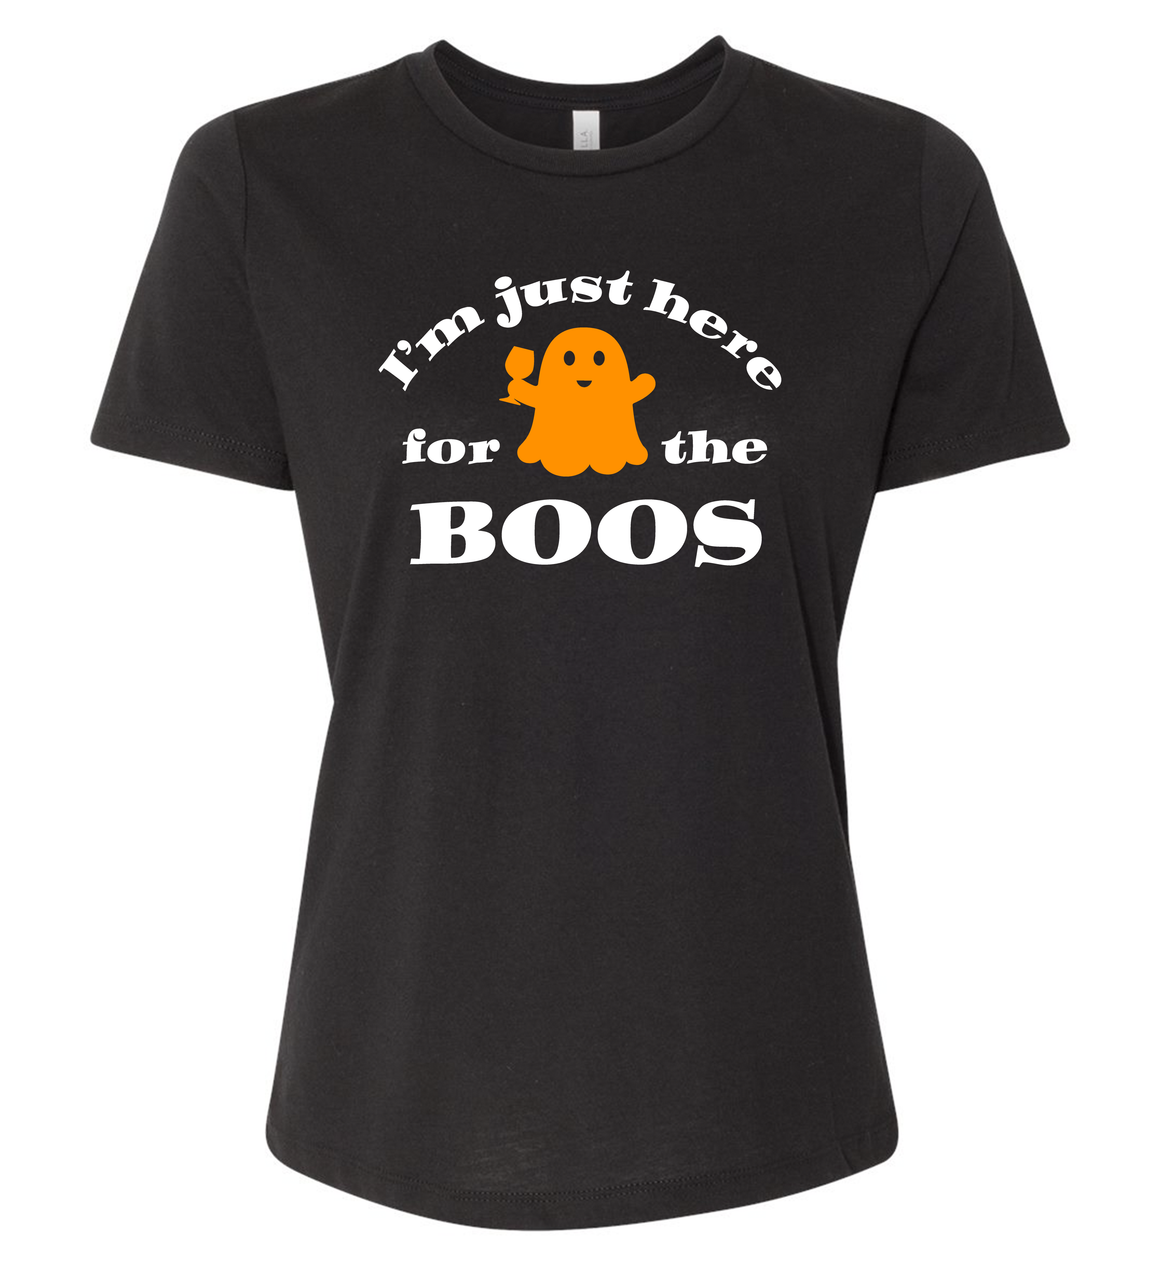 Triblend Women's "Here for the Boo's" Relaxed Crew T-Shirt